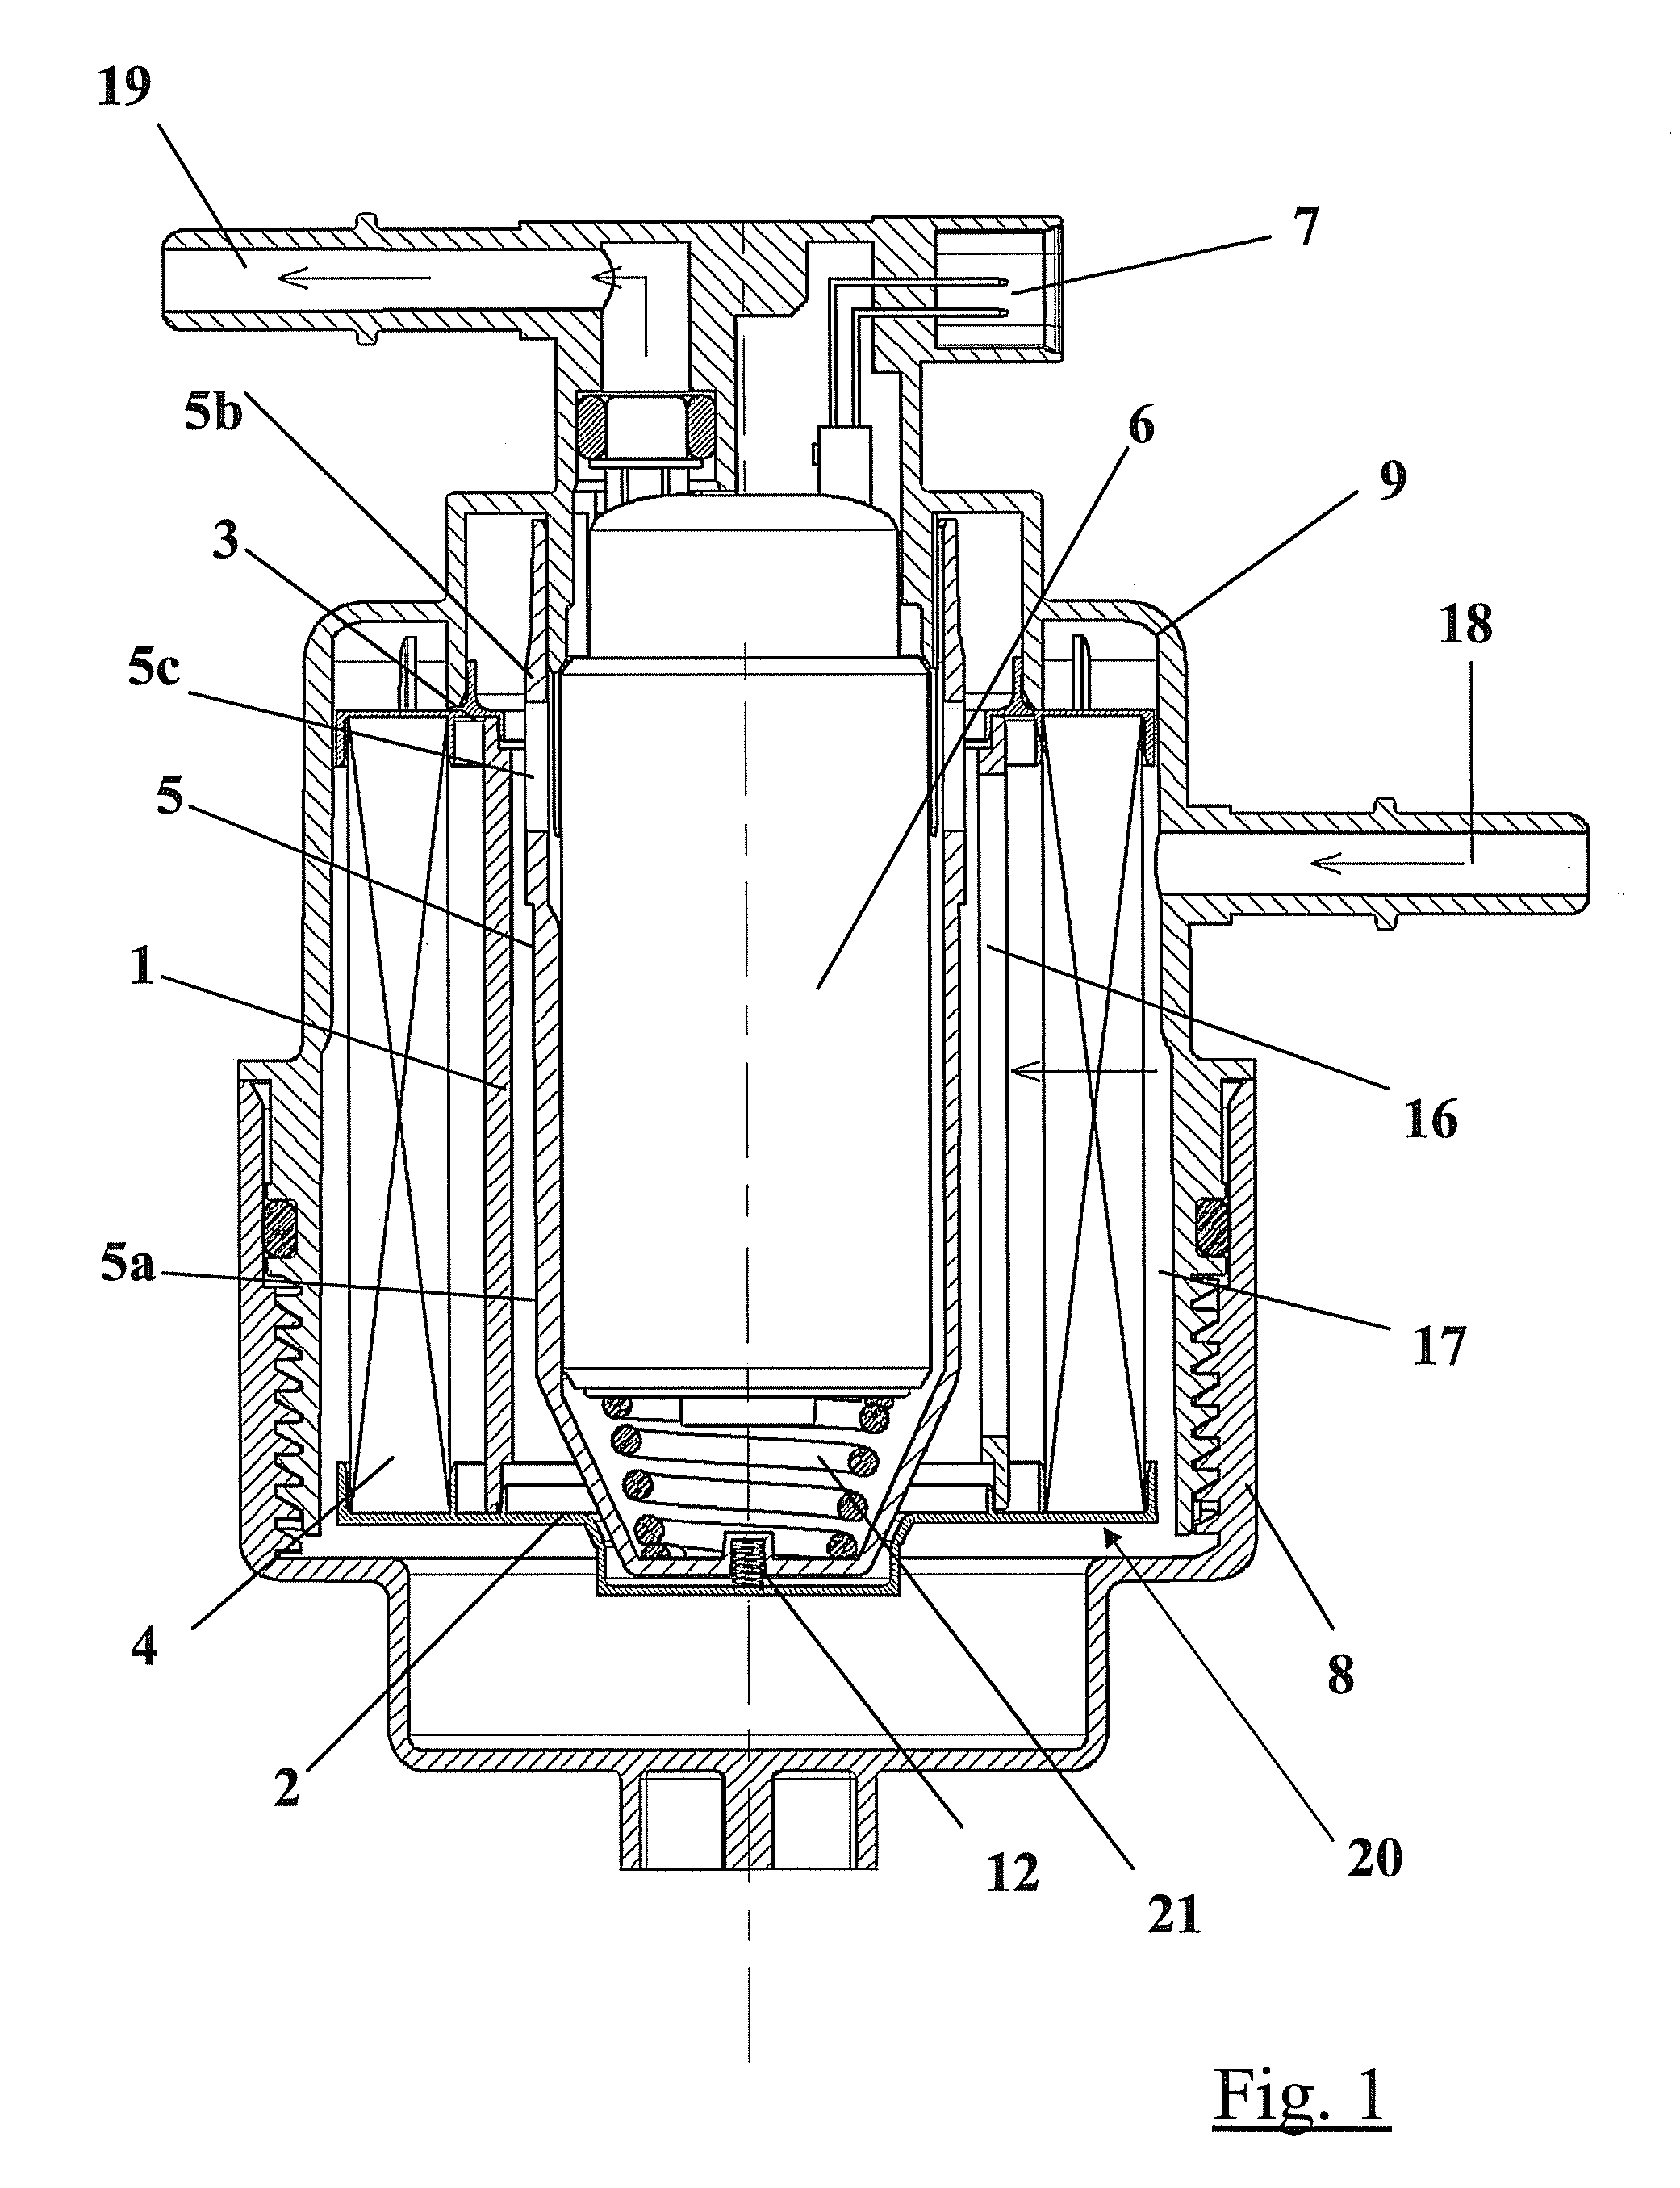 Fuel Filter and Filter Cartridge Allowing the Electrostatic Charges to be Drained Off